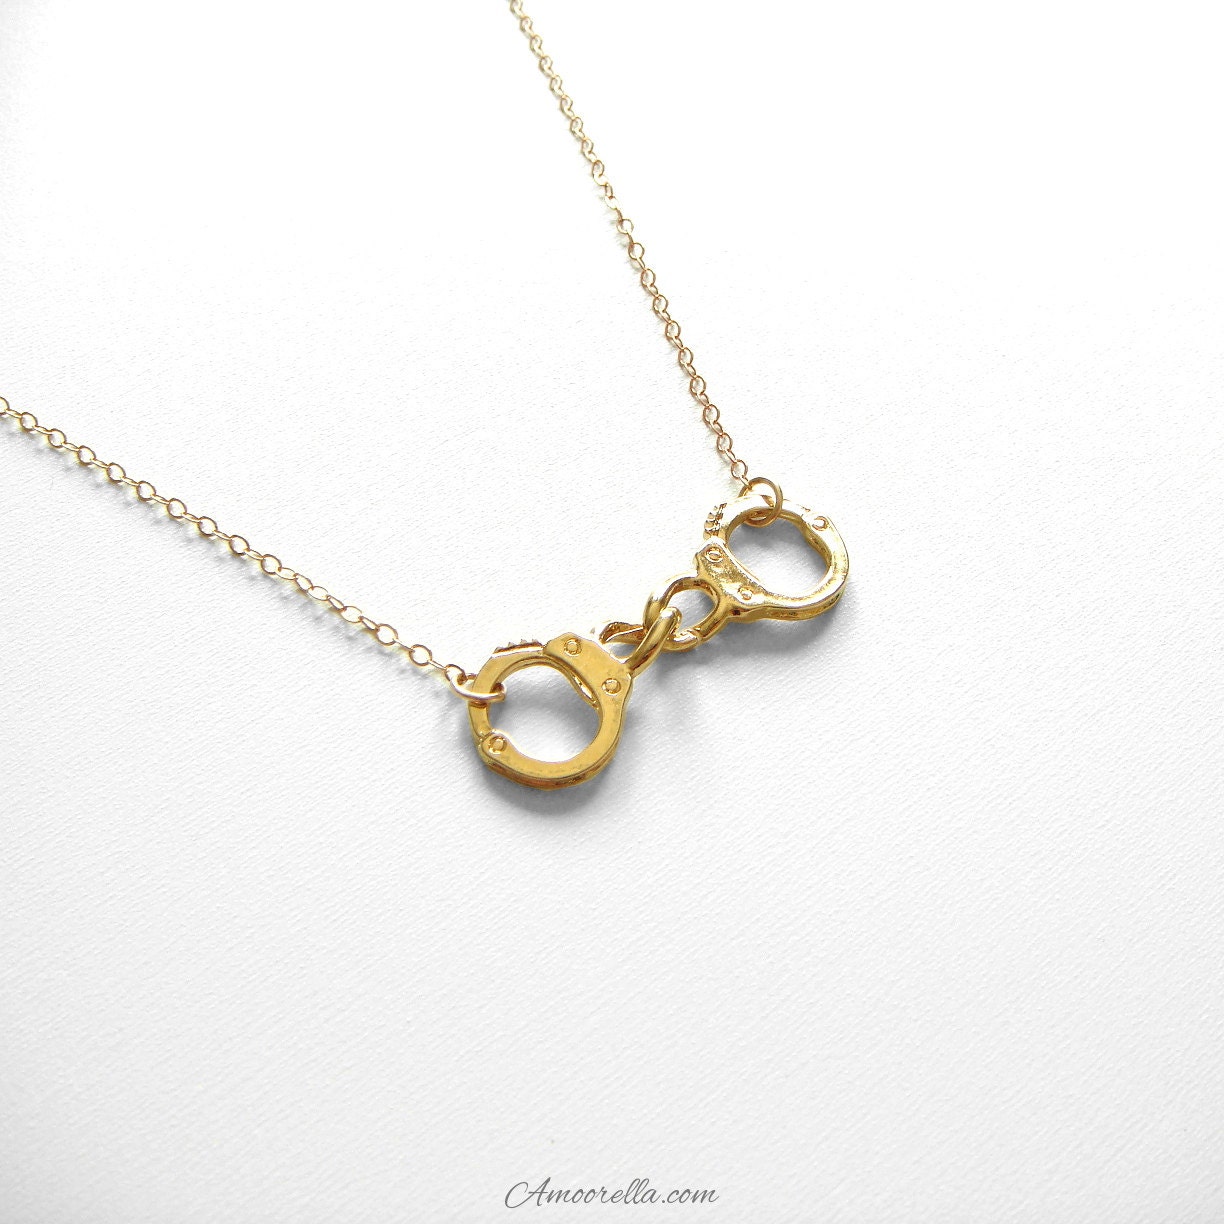 Handcuff Necklace / Dainty 14k Gold Filled Chain Thin Delicate